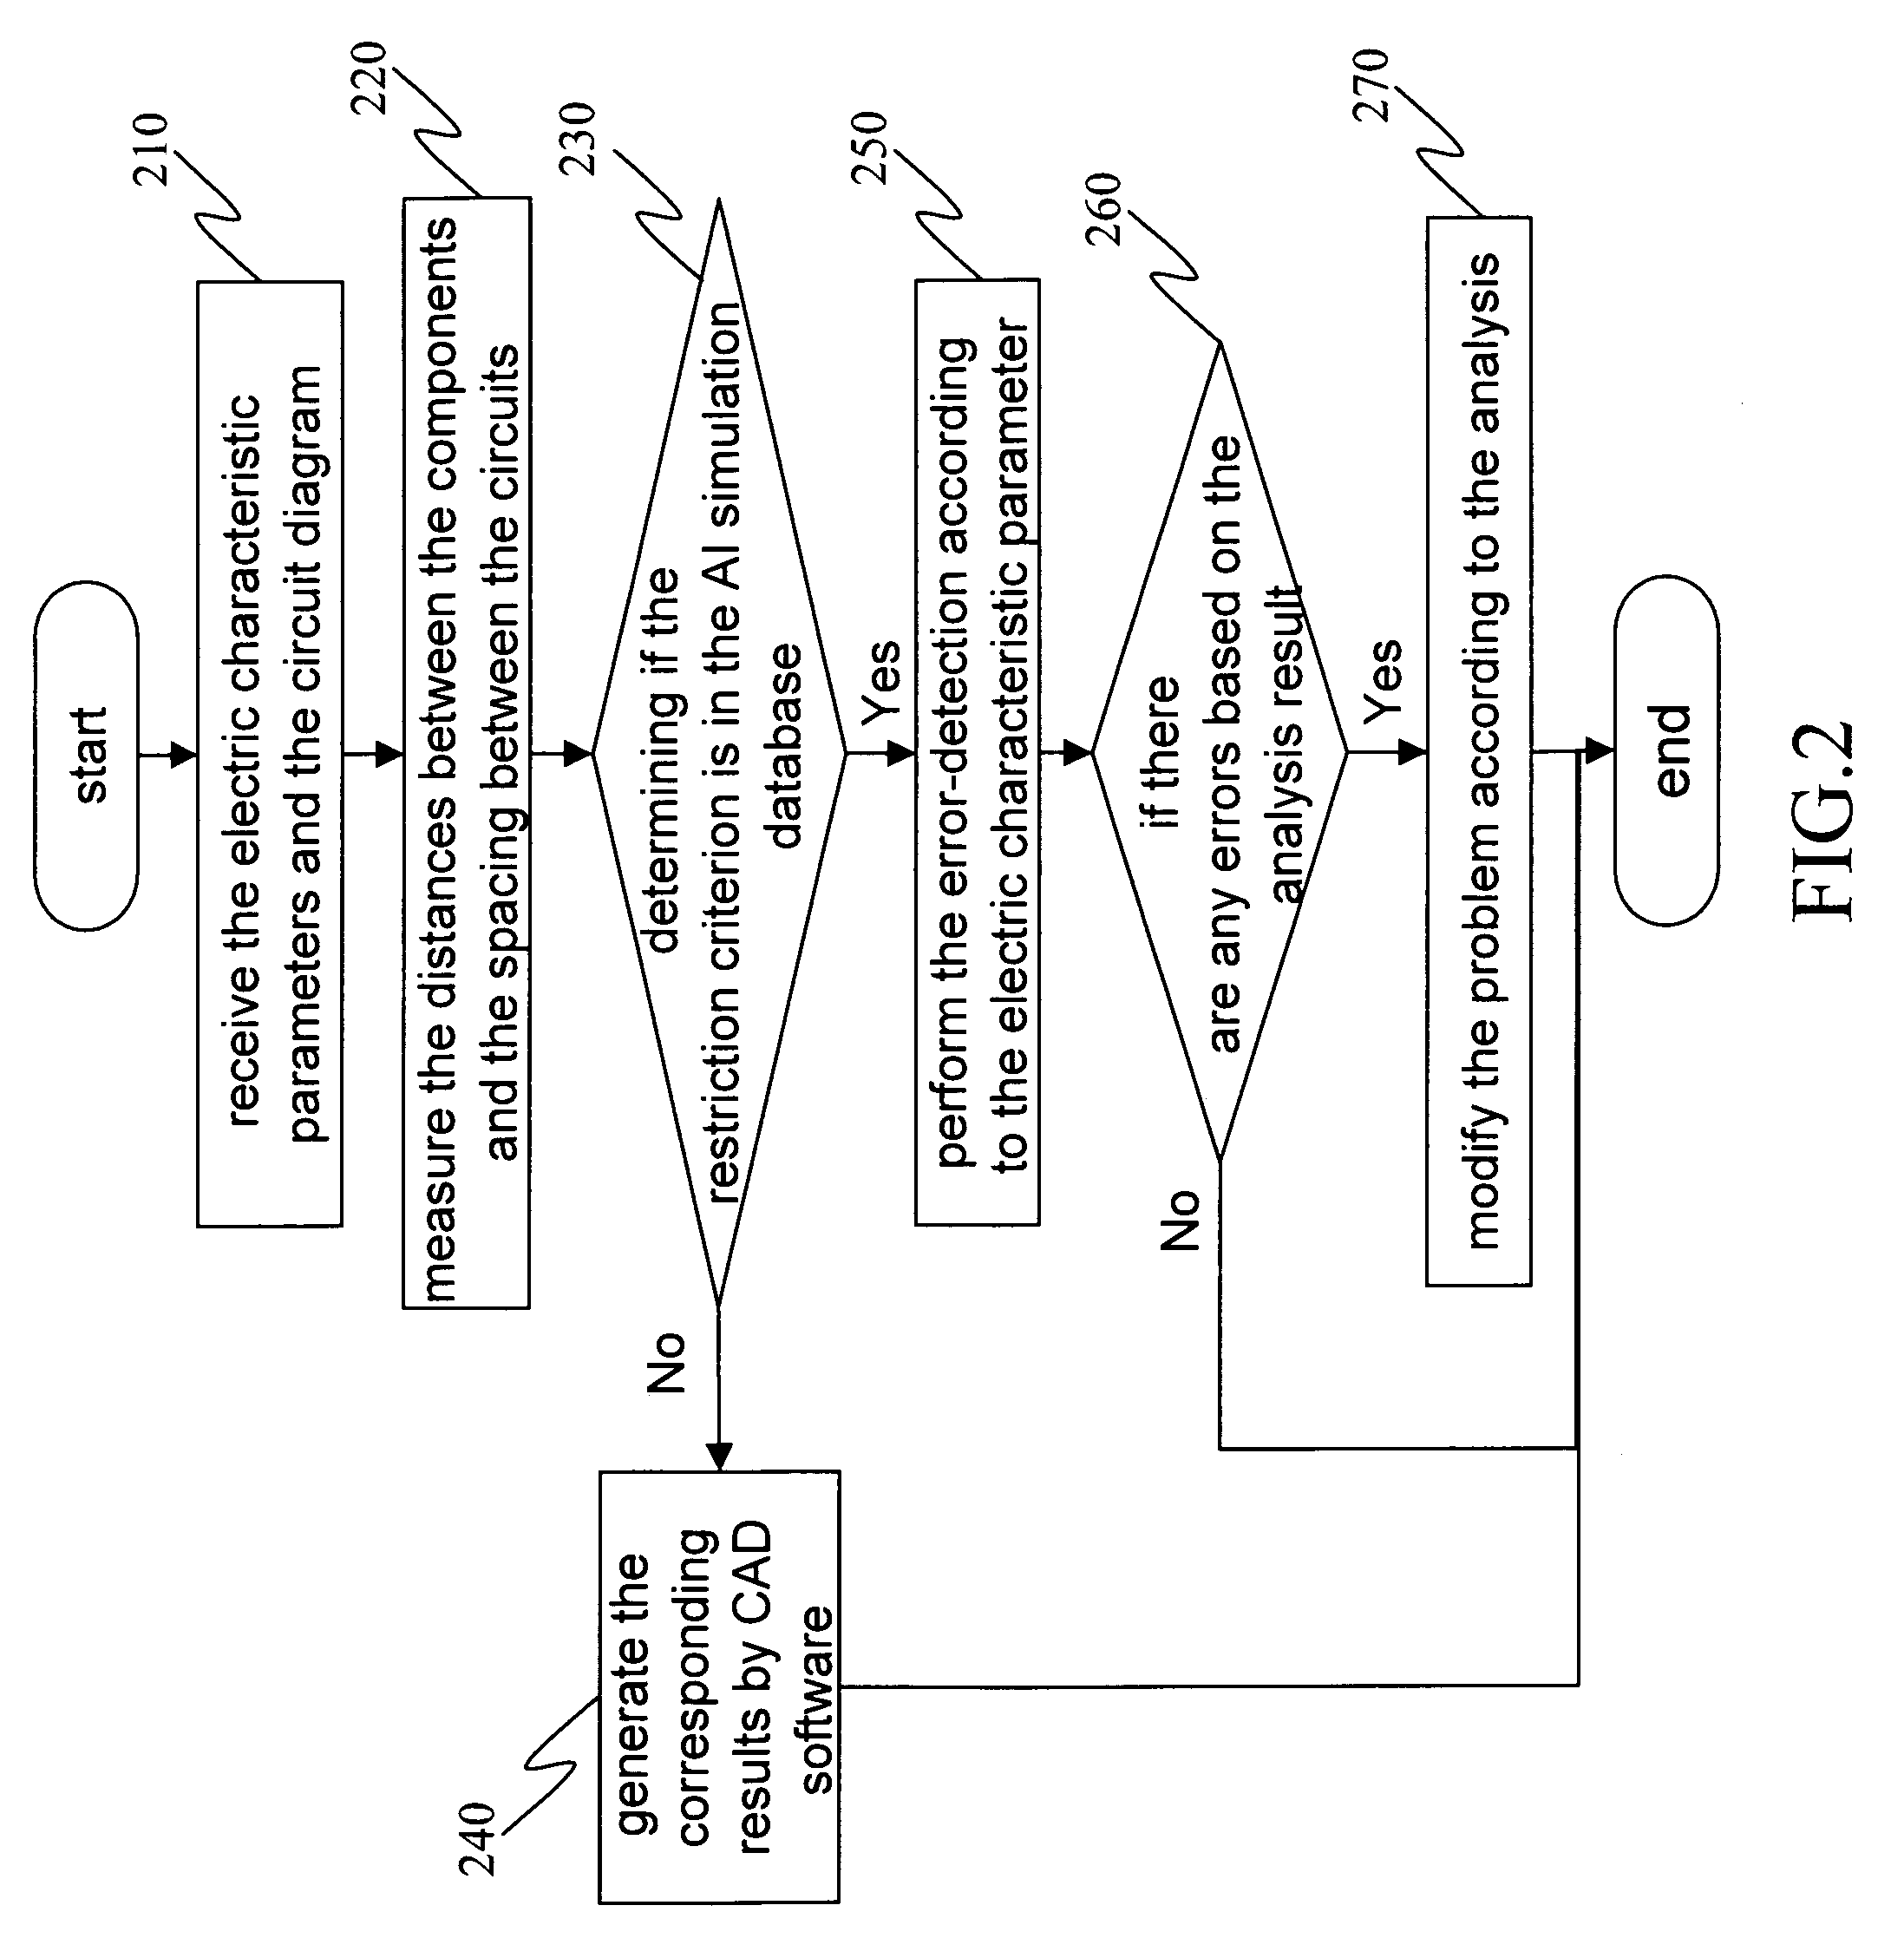 Database-aided circuit design system and method therefor